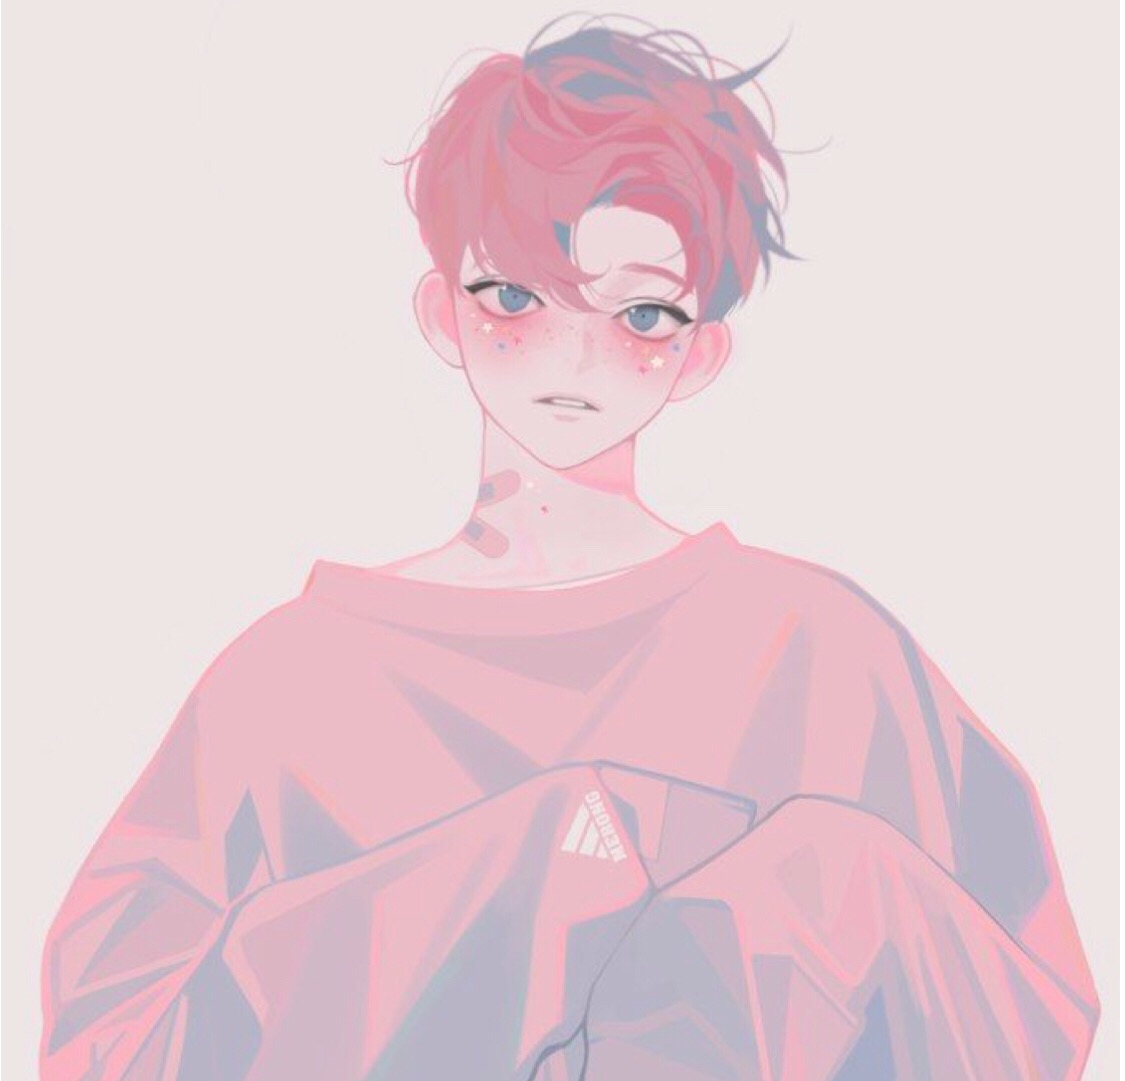 Post a male anime character with pink hair, - Anime Answers - Fanpop